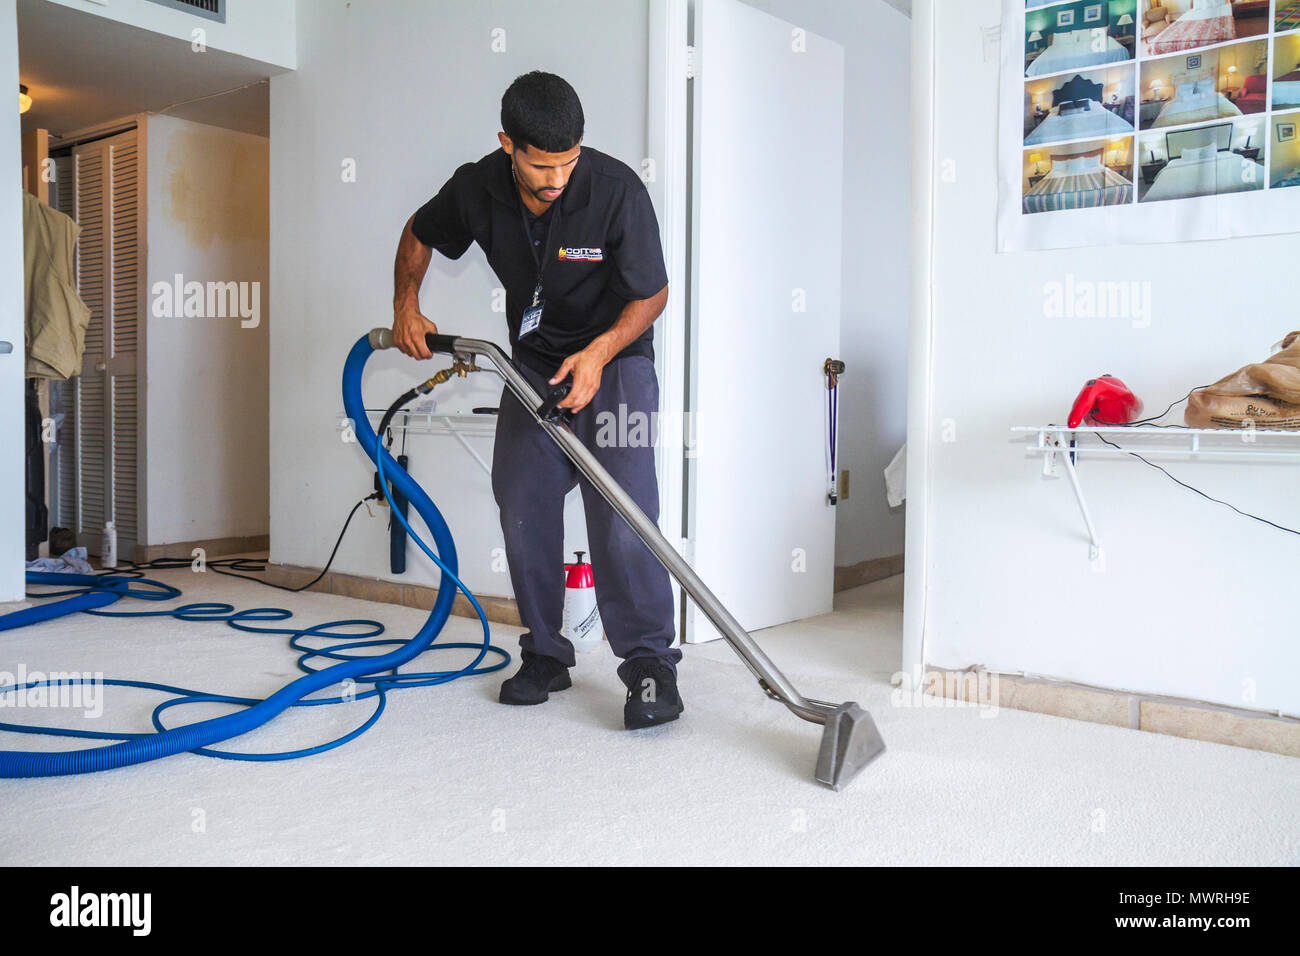 Miami Beach Florida,carpet cleaning,cleaner,Hispanic man men male adult adults,service,home,house home houses homes residence house home houses homes Stock Photo